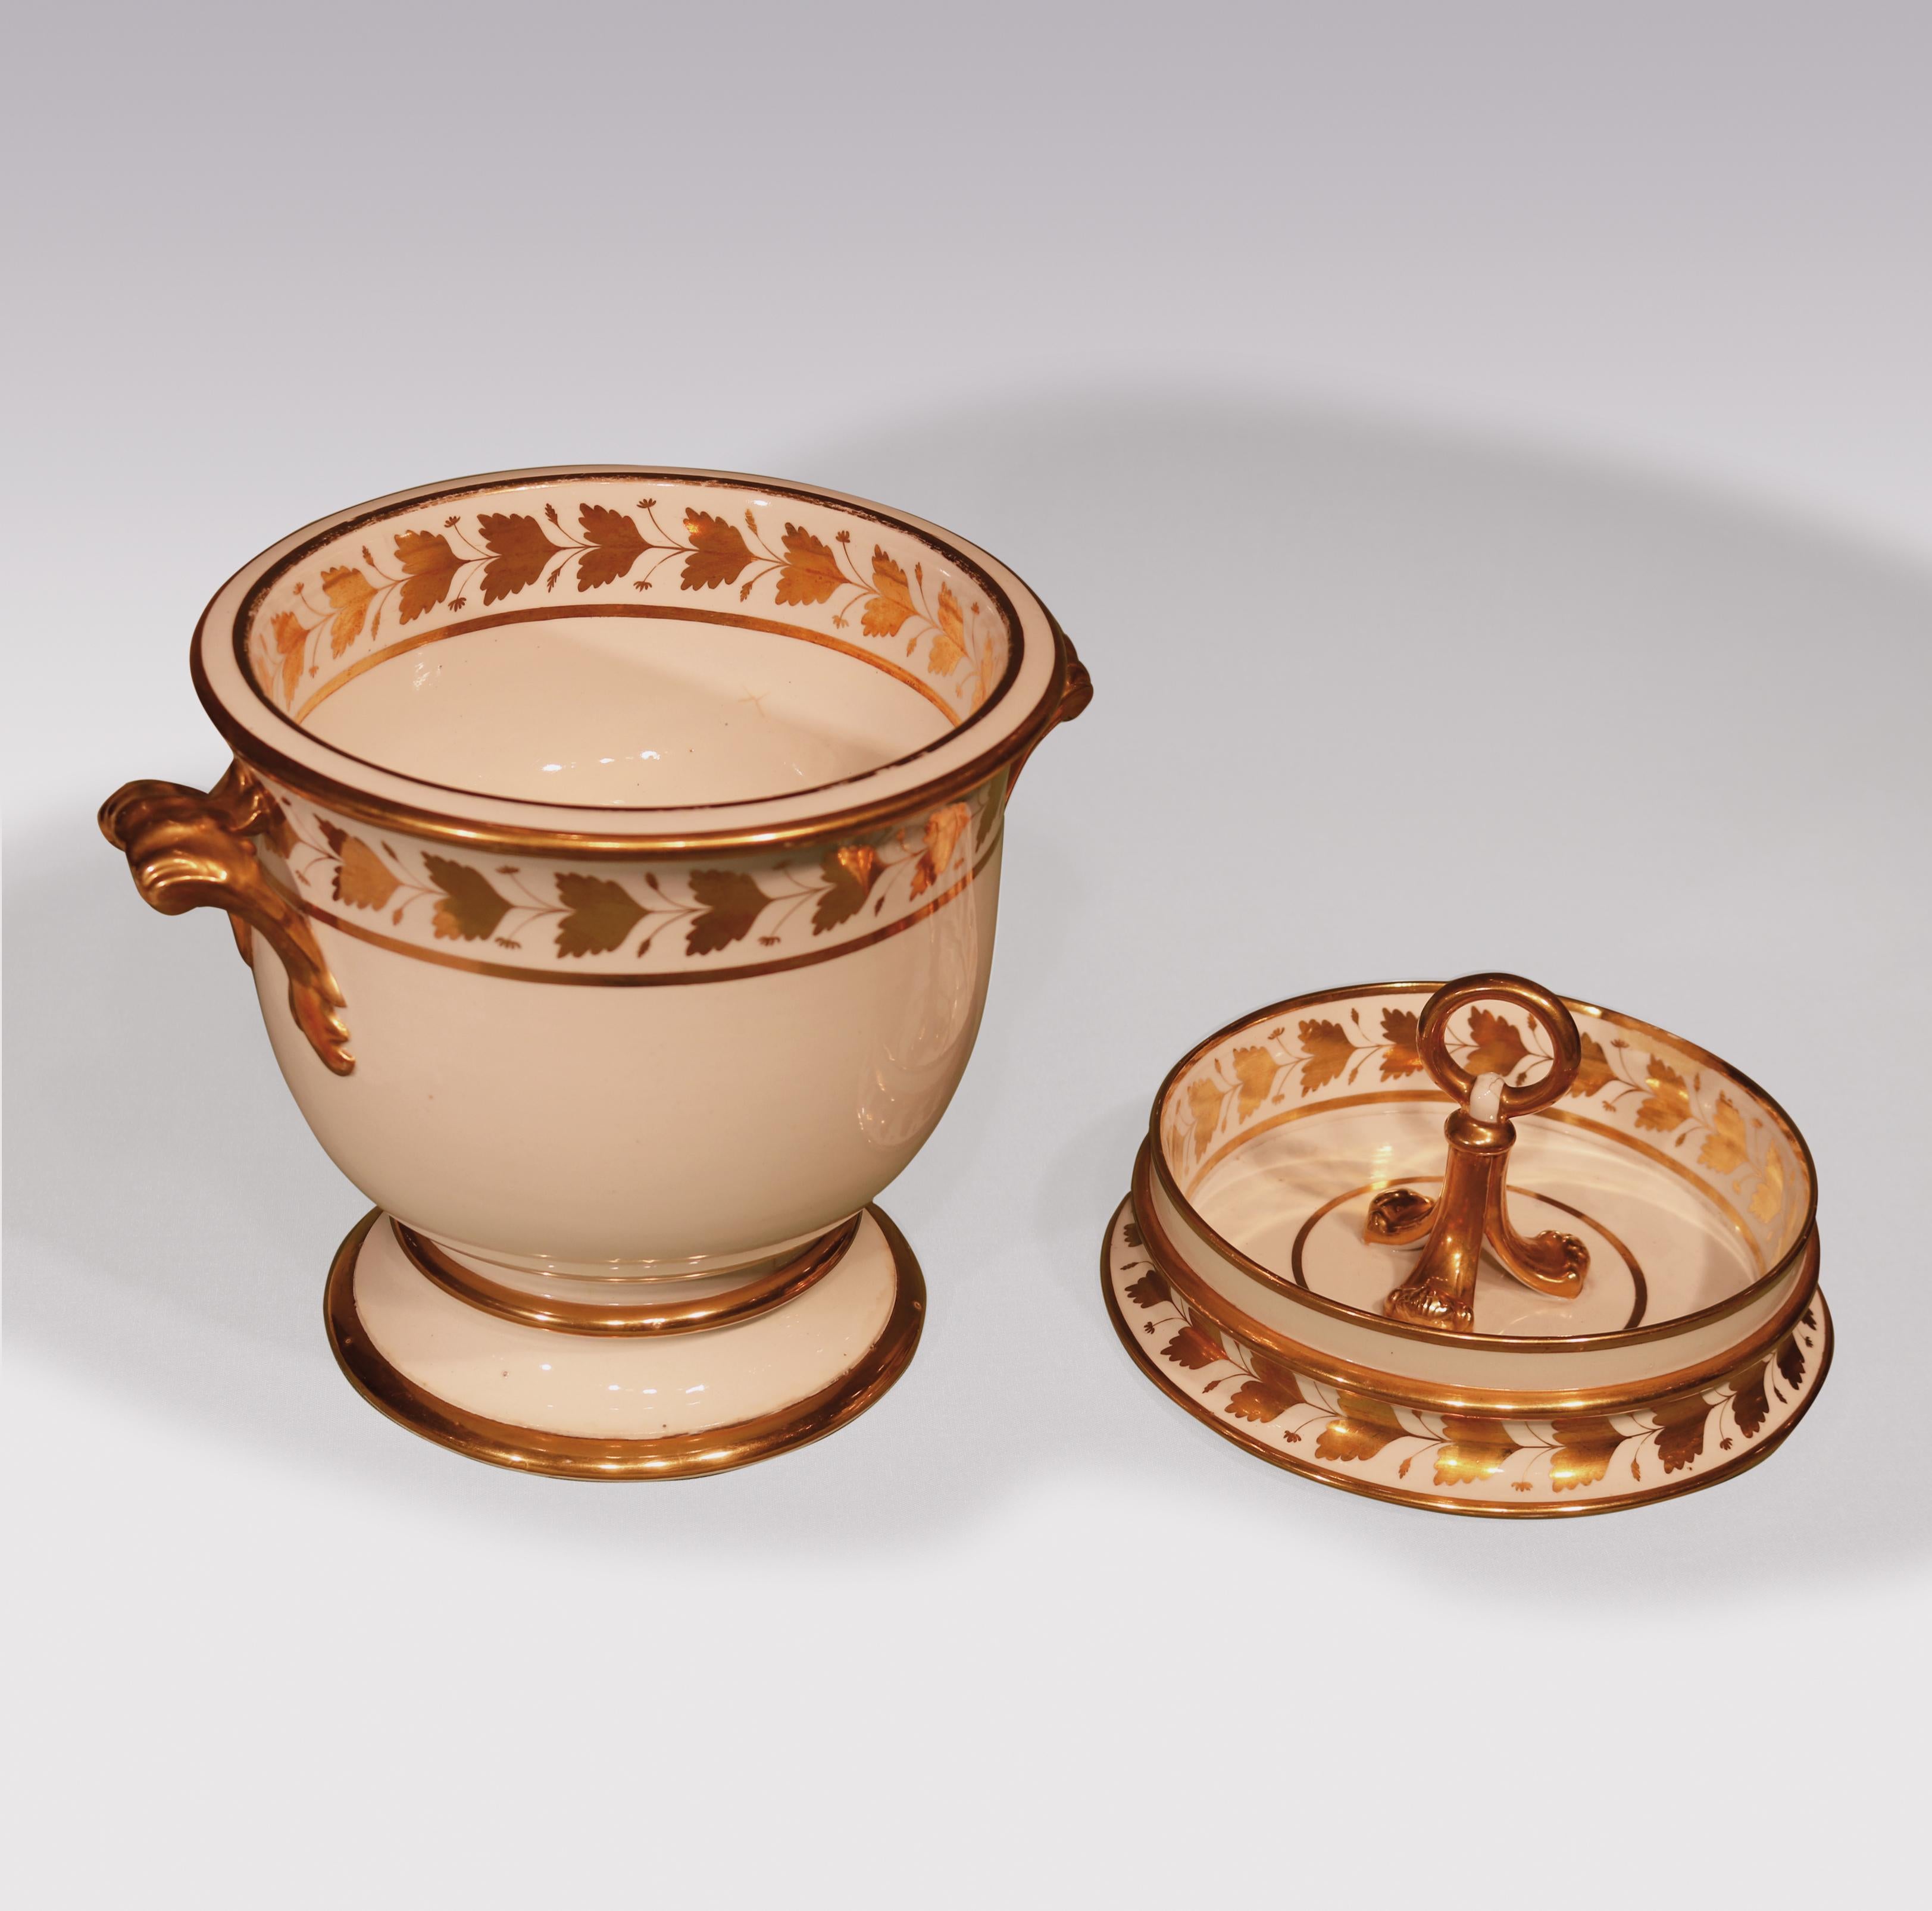 An early 19th century pair of porcelain ice-pails with gilt leaf decorated borders, part of a dessert service, comprising 20 plates, 3 shell dishes, 3 circular dishes, 4 oval dishes, 1 comport and a pair of ice-pails.